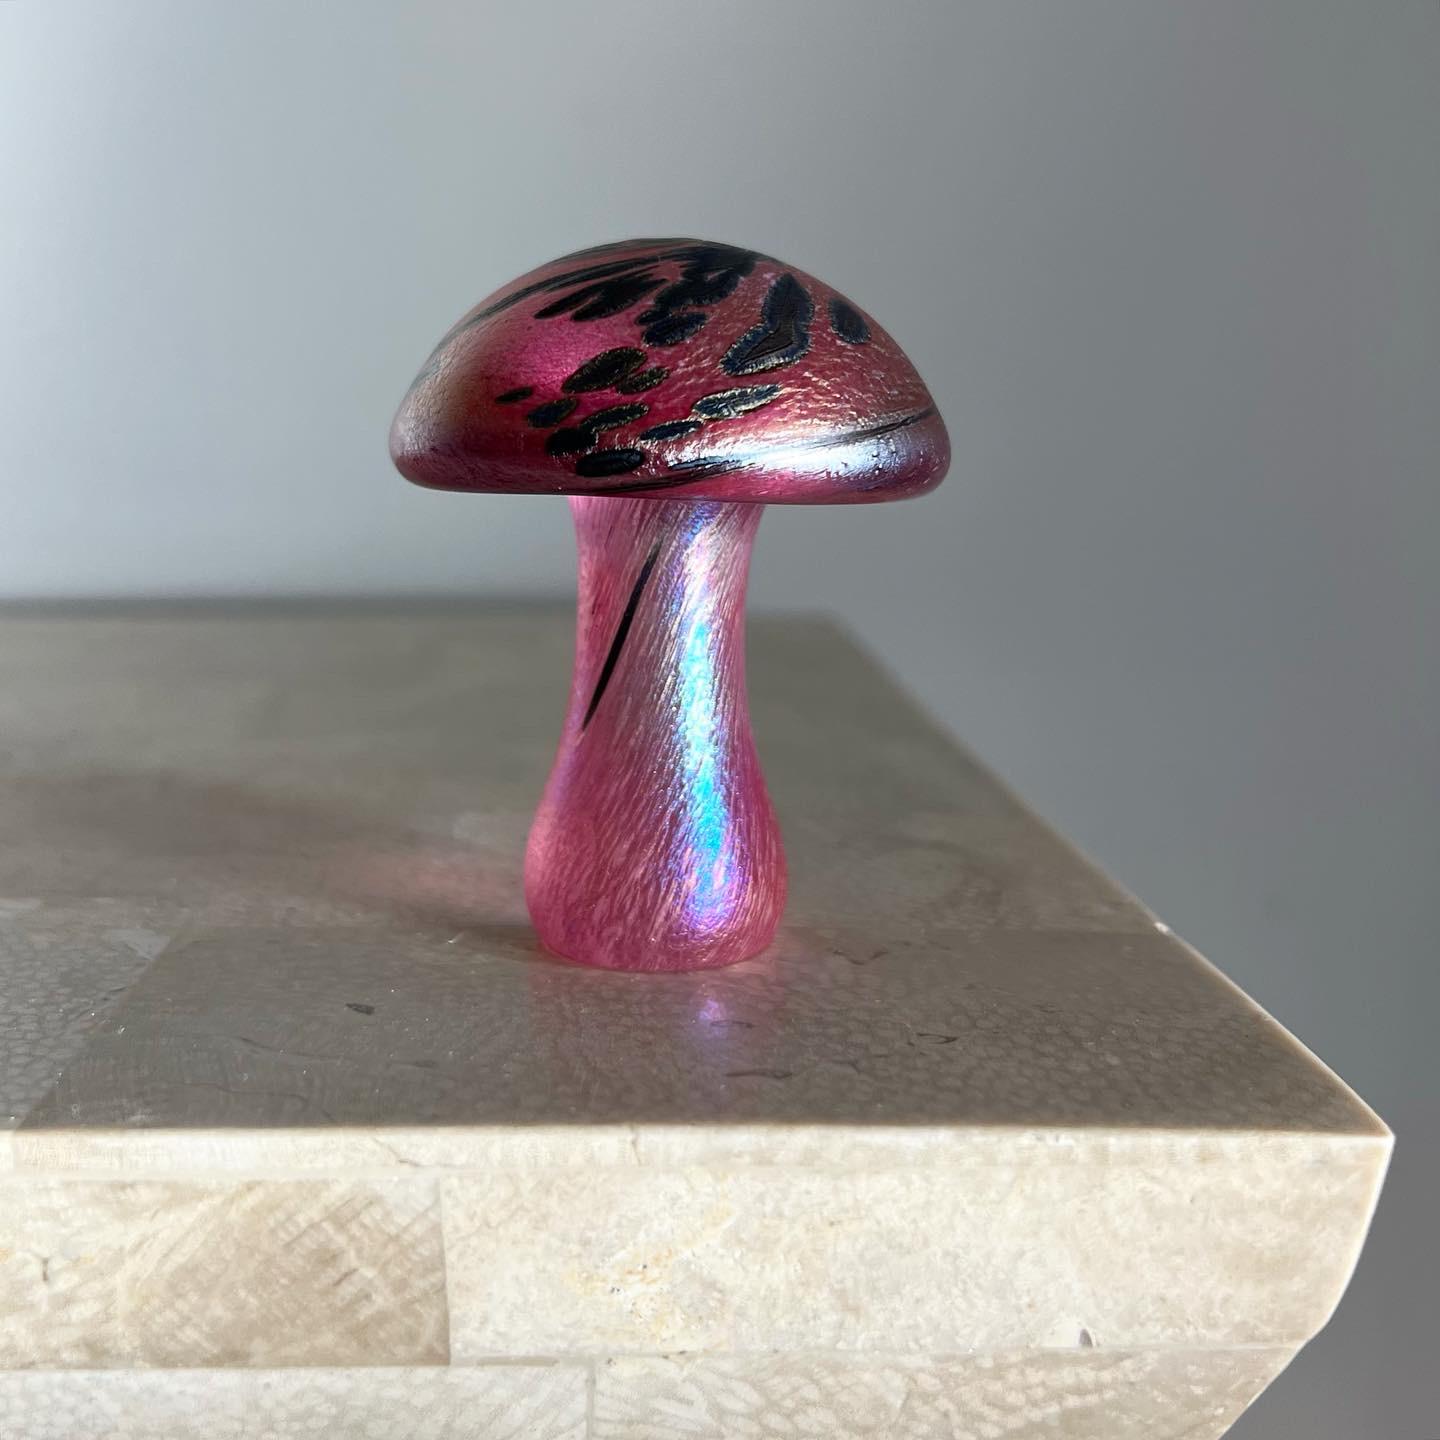 A gorgeous hand-crafted art glass mushroom objet d’art or paperweight, early aughts. Signed «K.Heaton» on bottom. Tones of dusk pink, marigold, and basalt. Flawless. Pick up in LA or worldwide shipping available.
Measures: 2.25” diameter x 3”